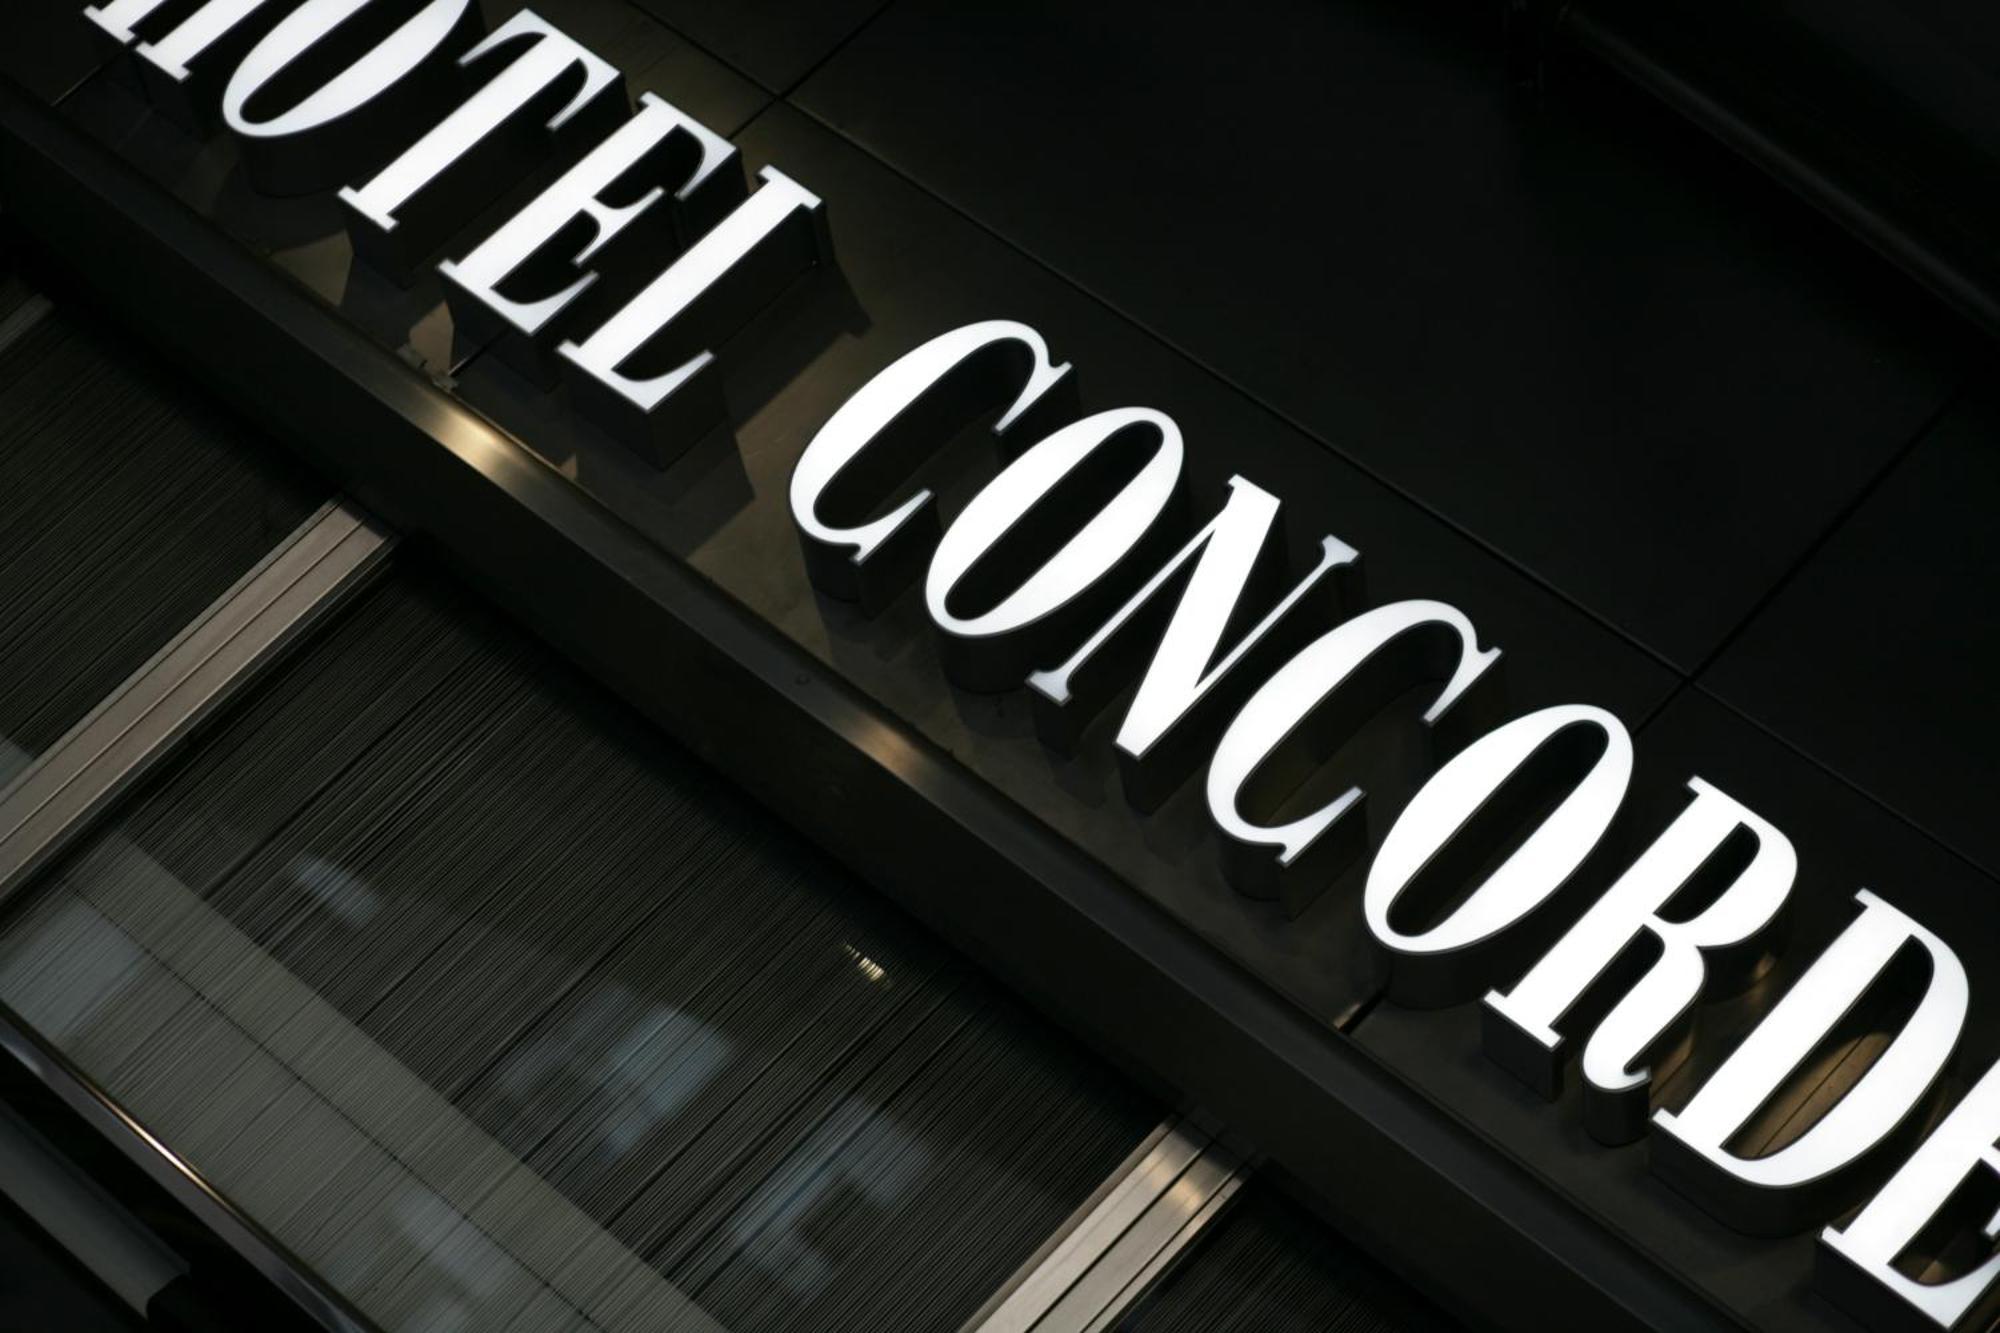 Antares Hotel Concorde, BW Signature Collection By Best Western Milan Exterior photo